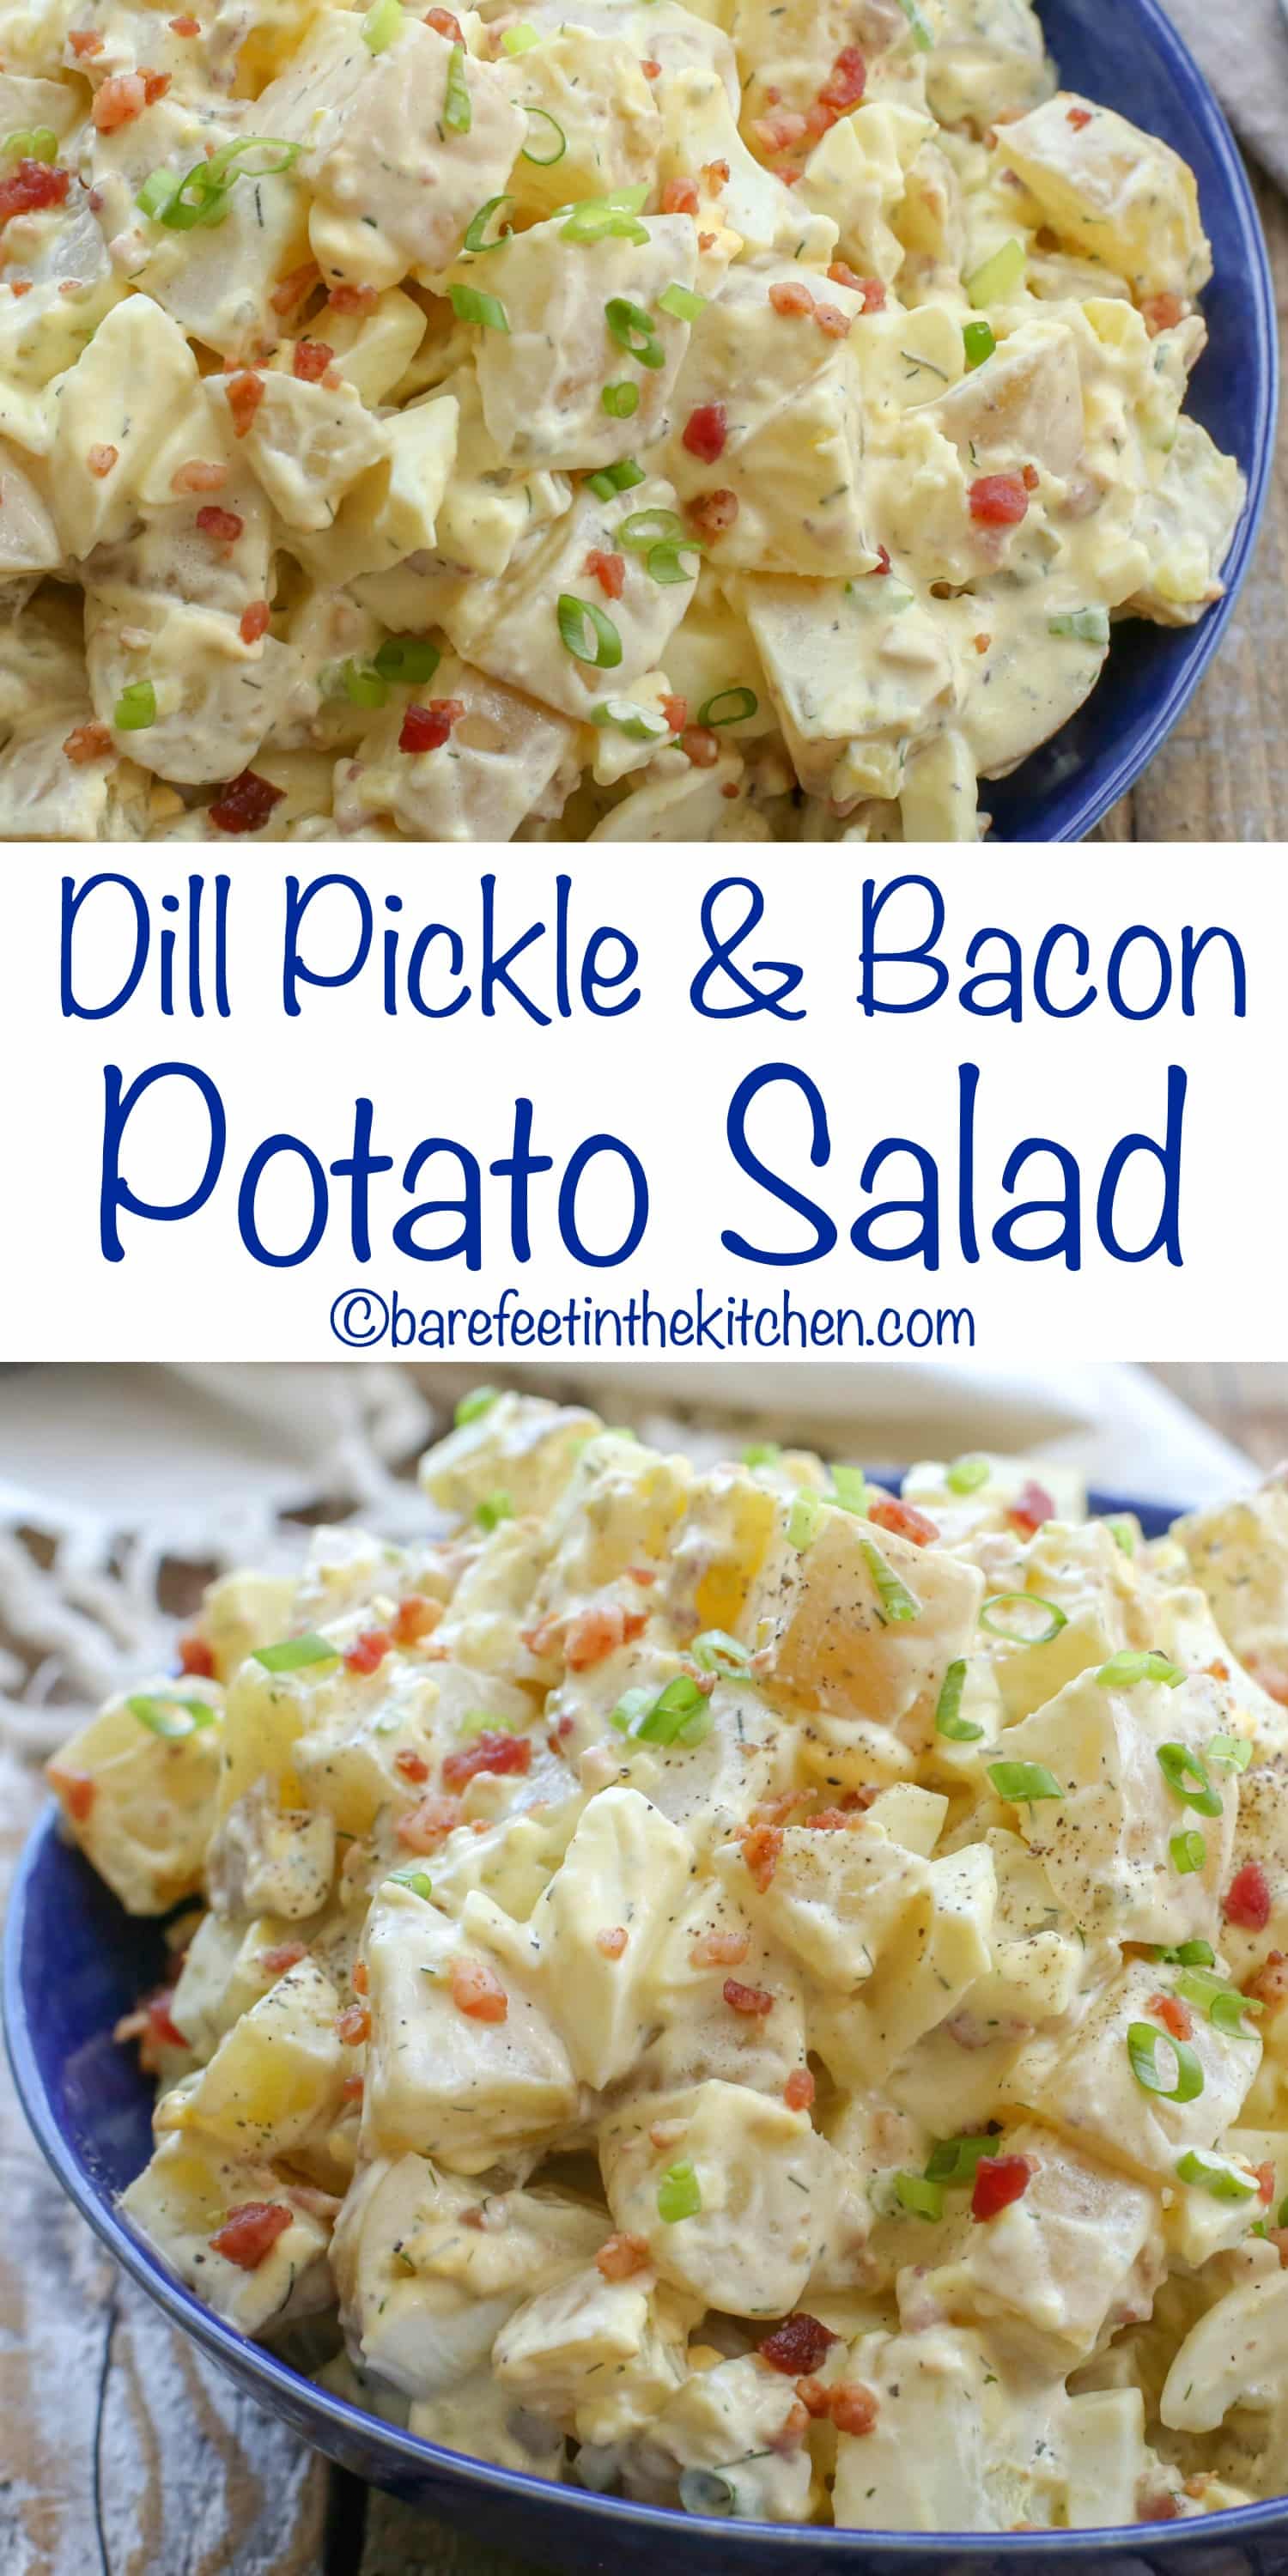 Dill Pickle and Bacon Potato Salad | Barefeet in the Kitchen